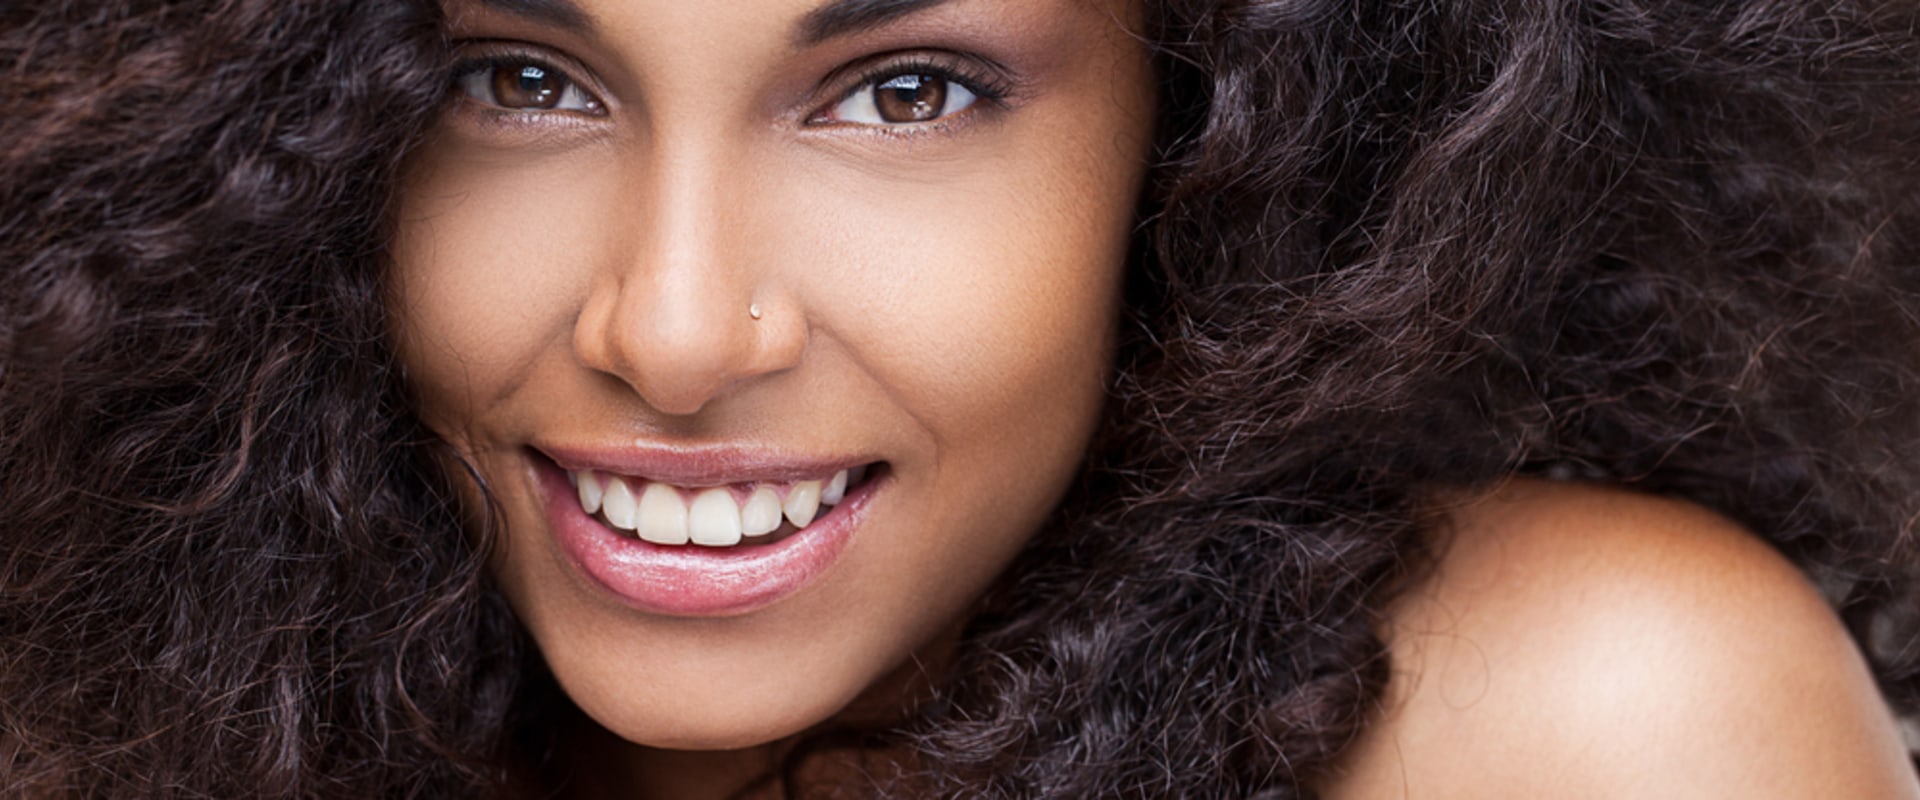 How Long Does It Take for Juvederm to Soften and Settle?